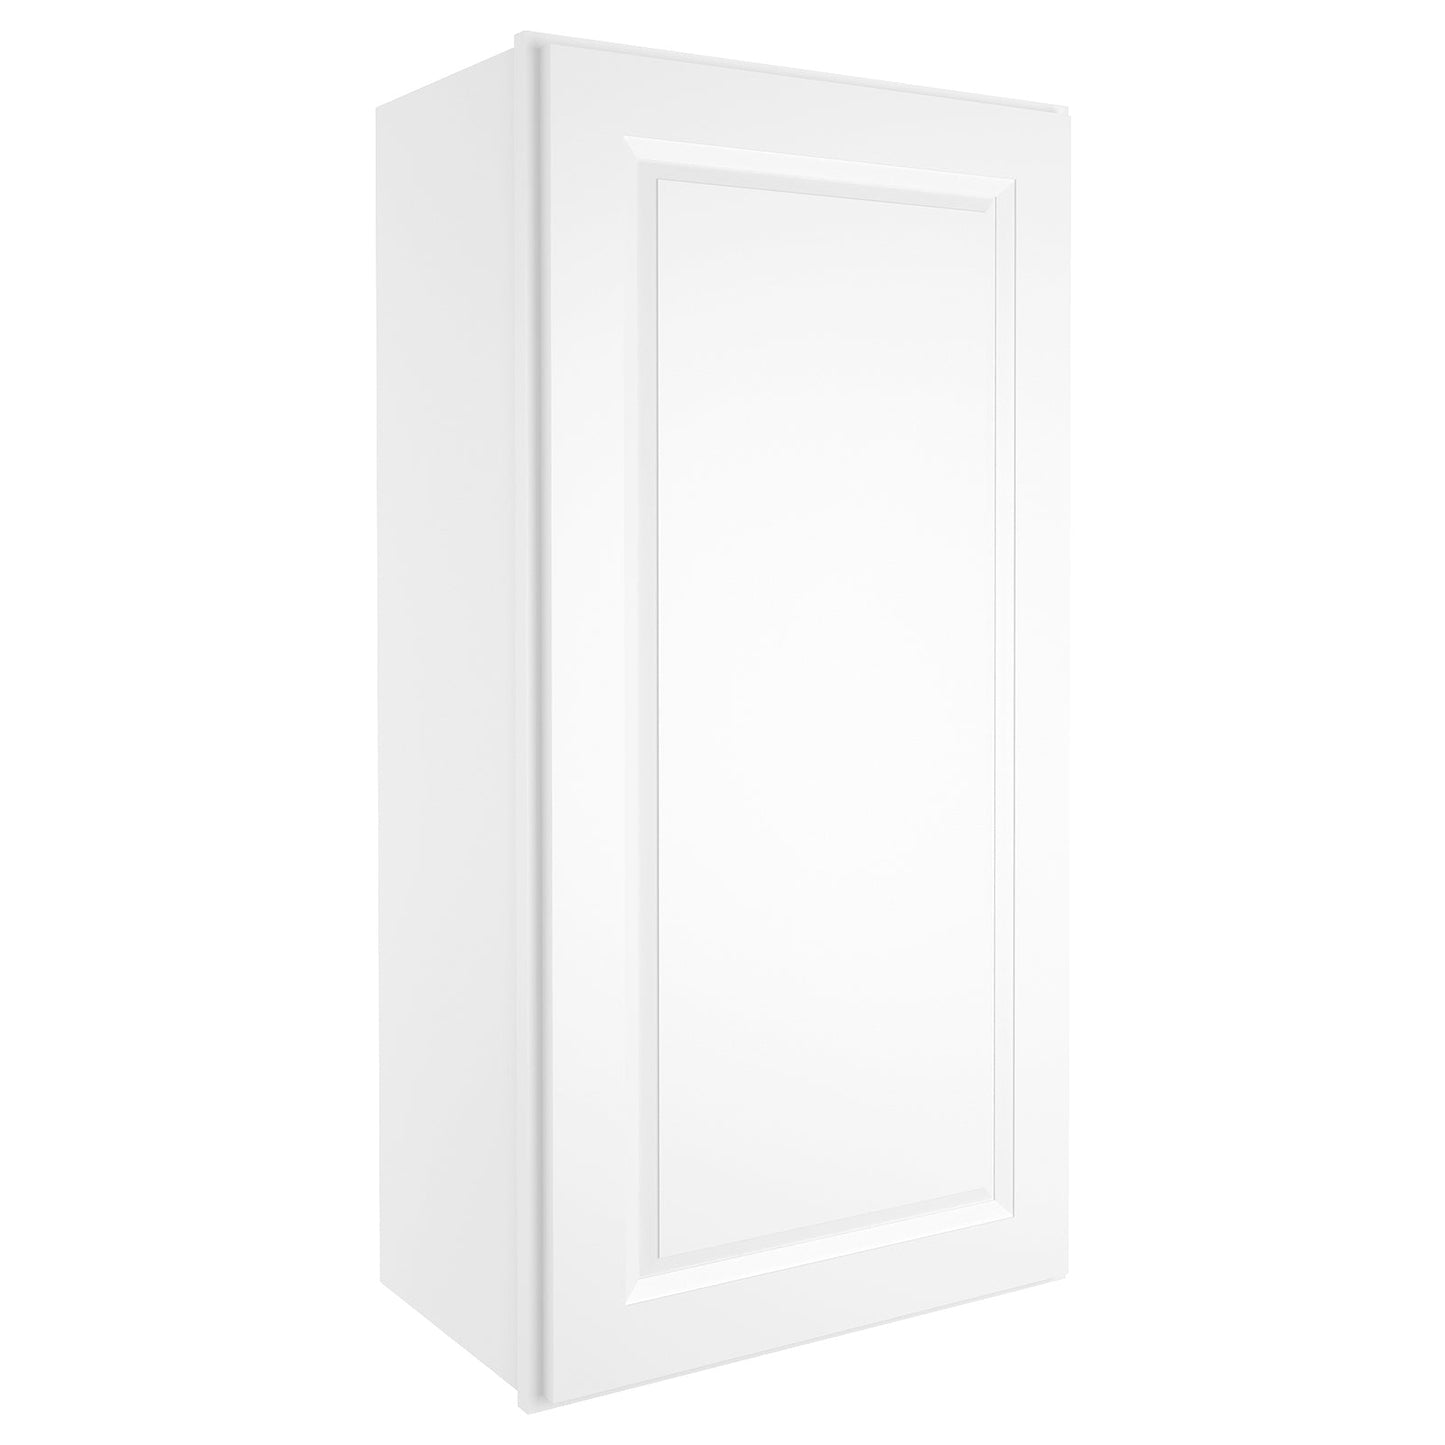 Medicine Cabinet Wall Mounted W2142